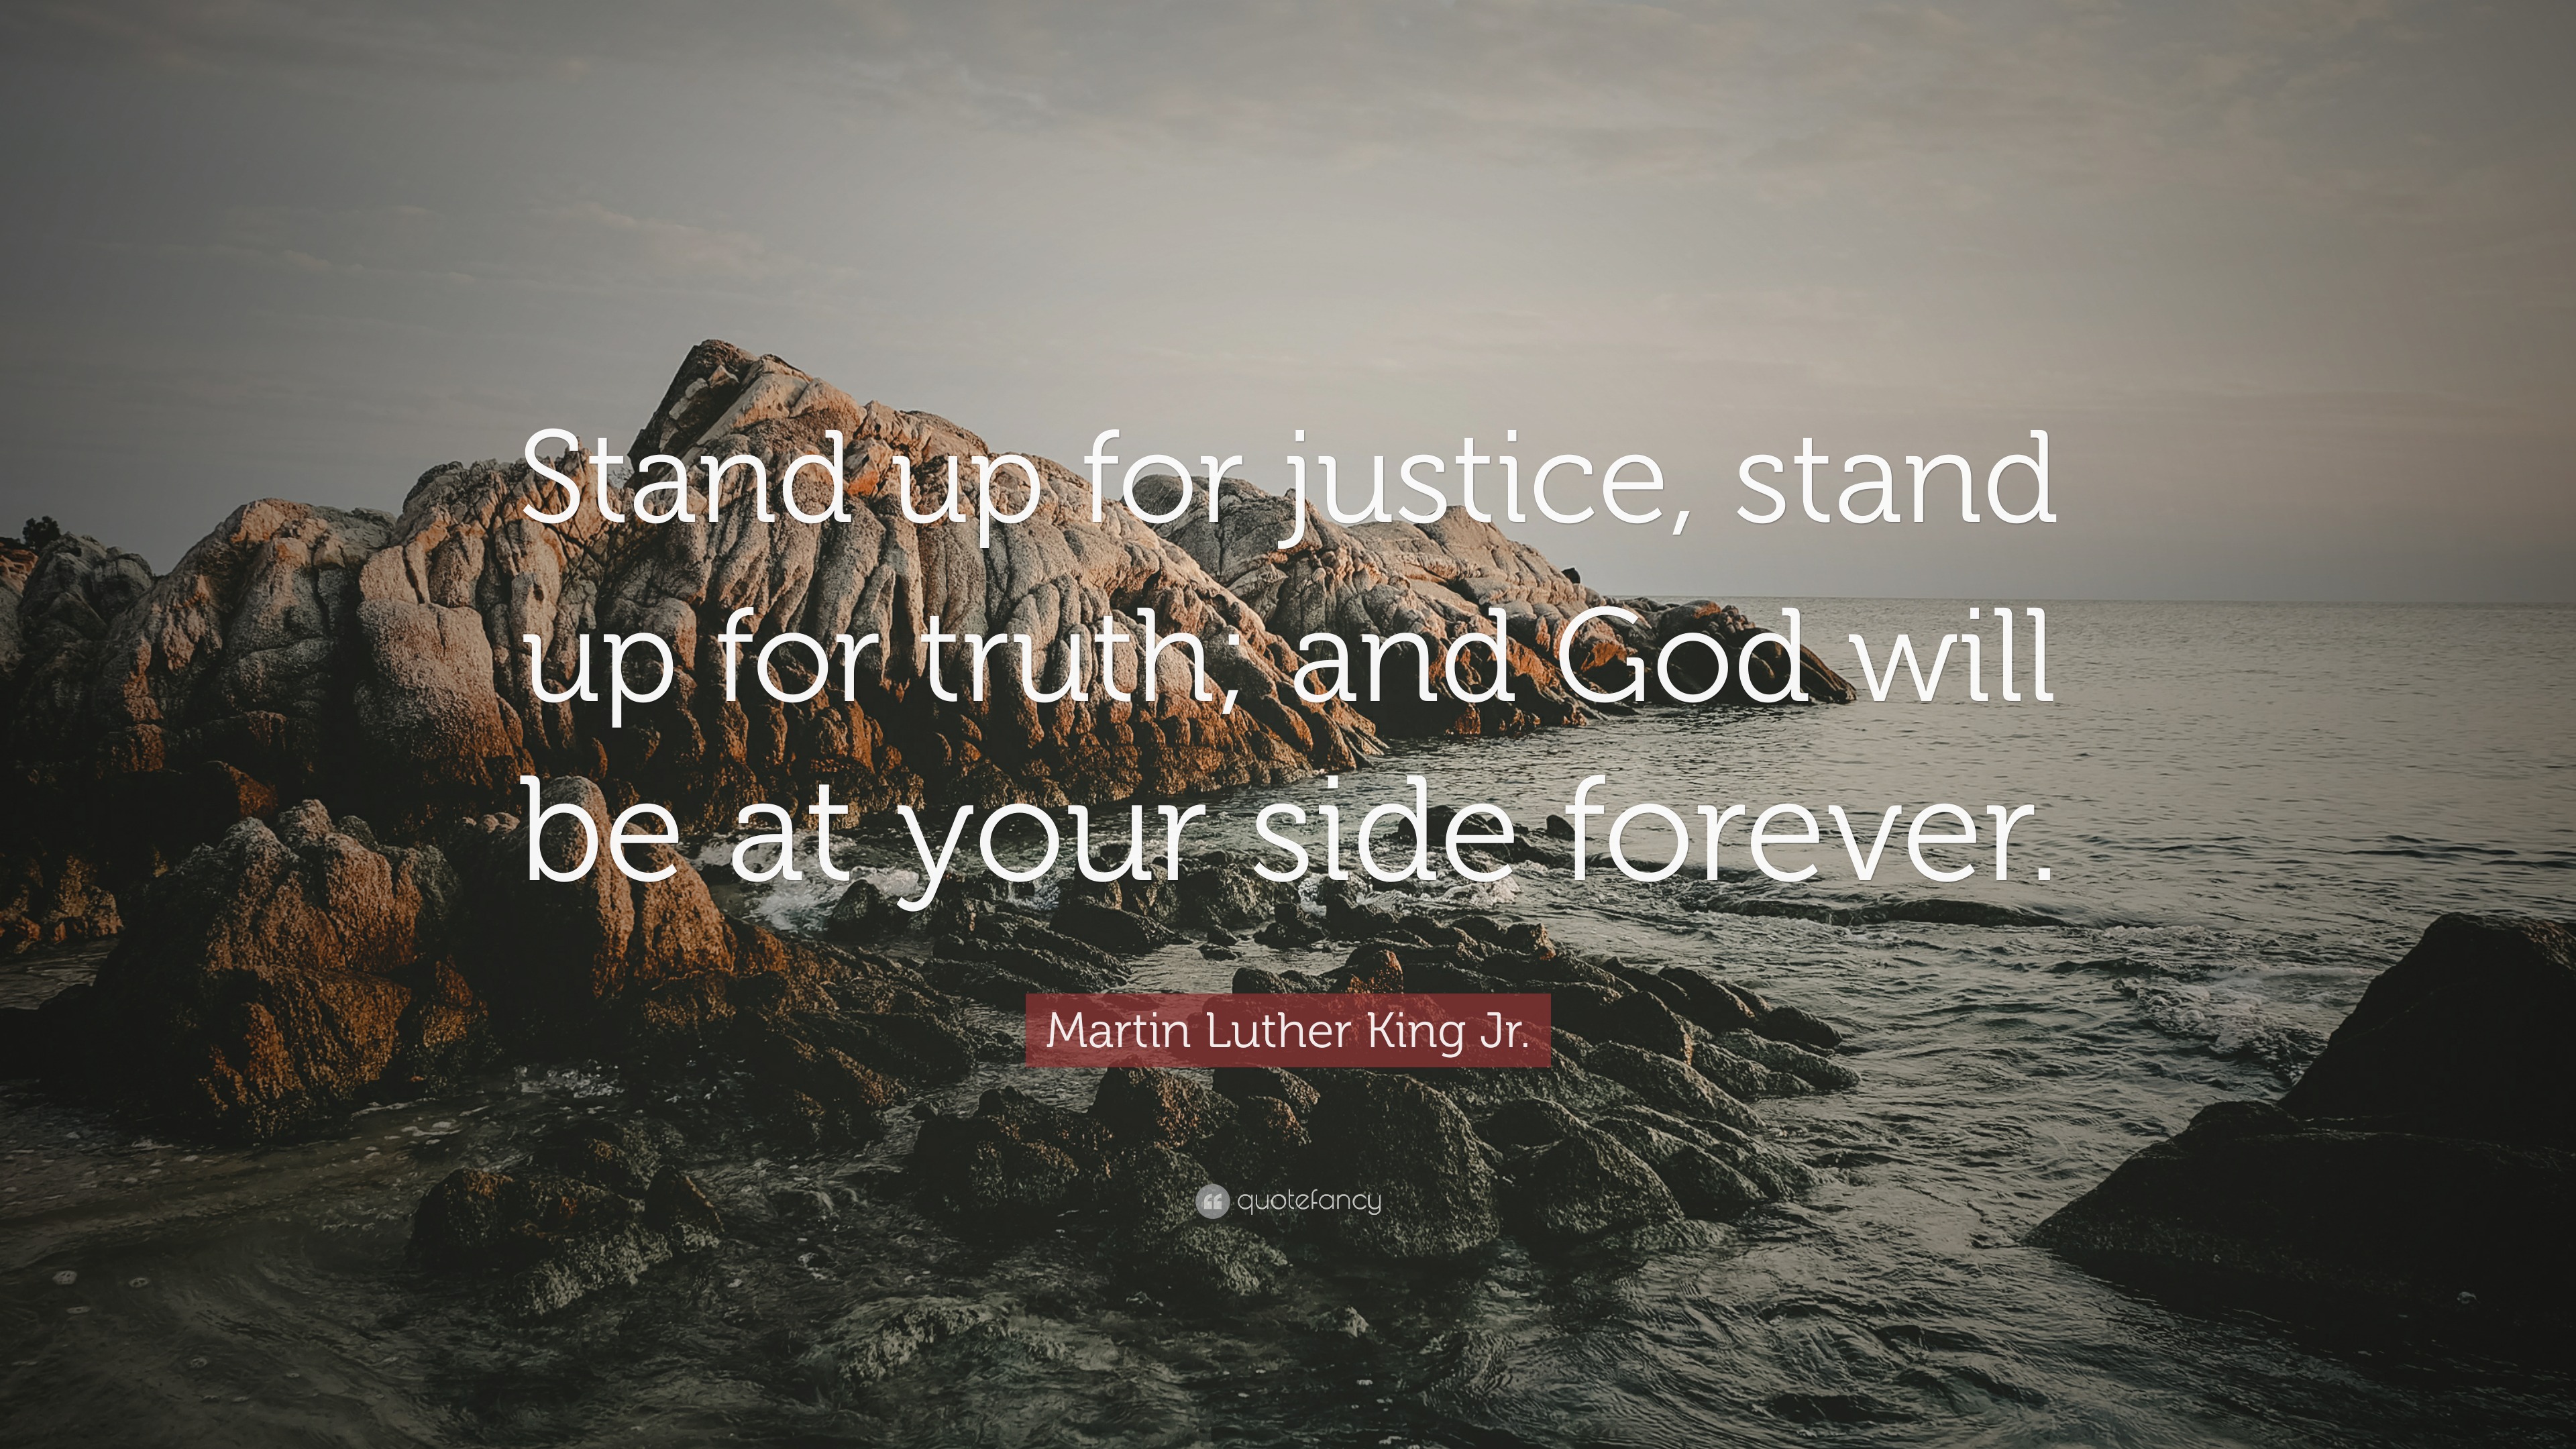 2768938 Martin Luther King Jr Quote Stand up for justice stand up for